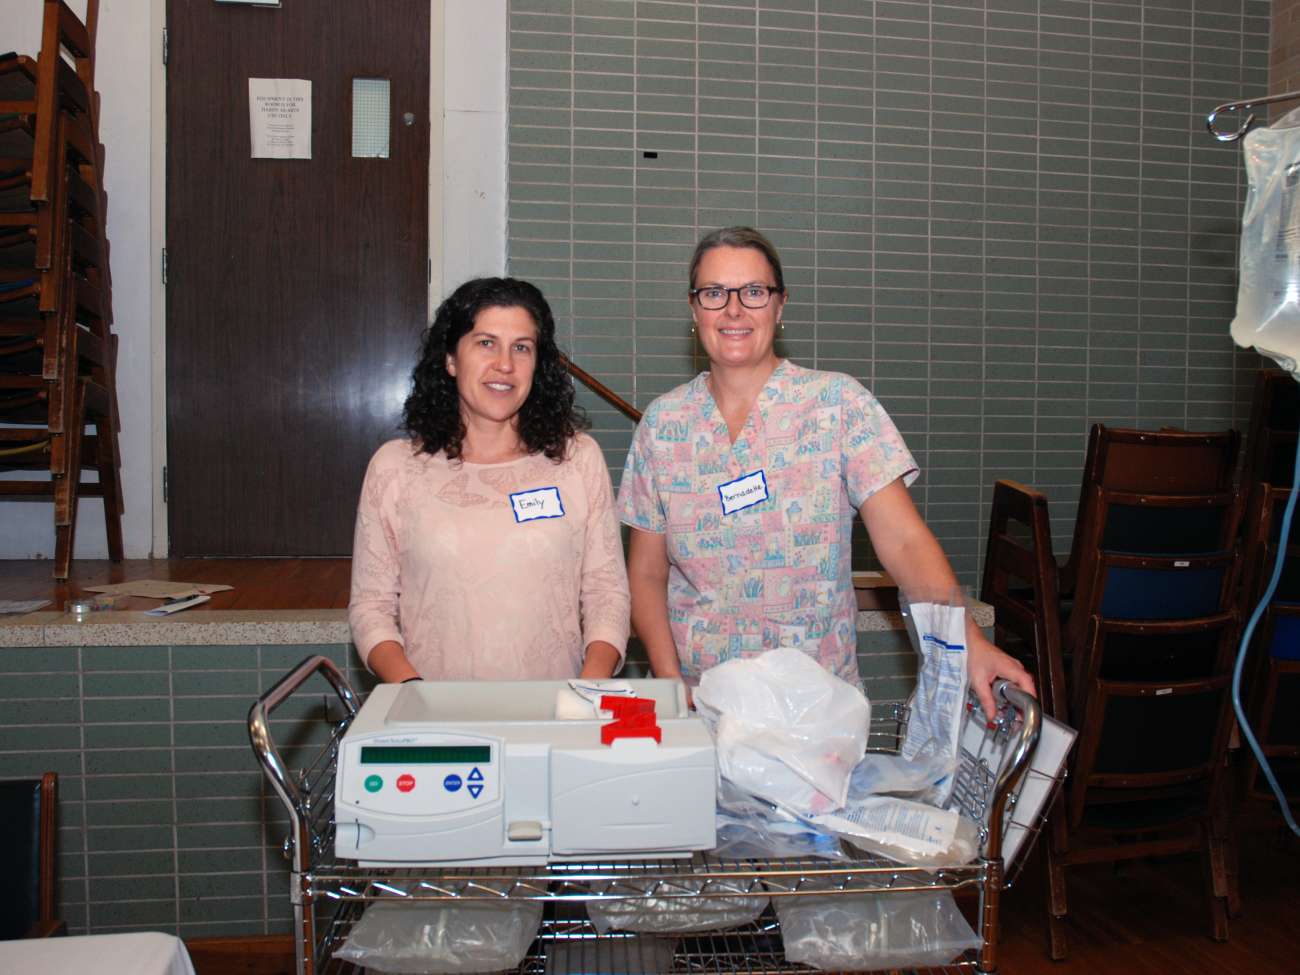 Registered nurses Emily Hurst and Bernadette Mandl who work in peritoneal dialysis